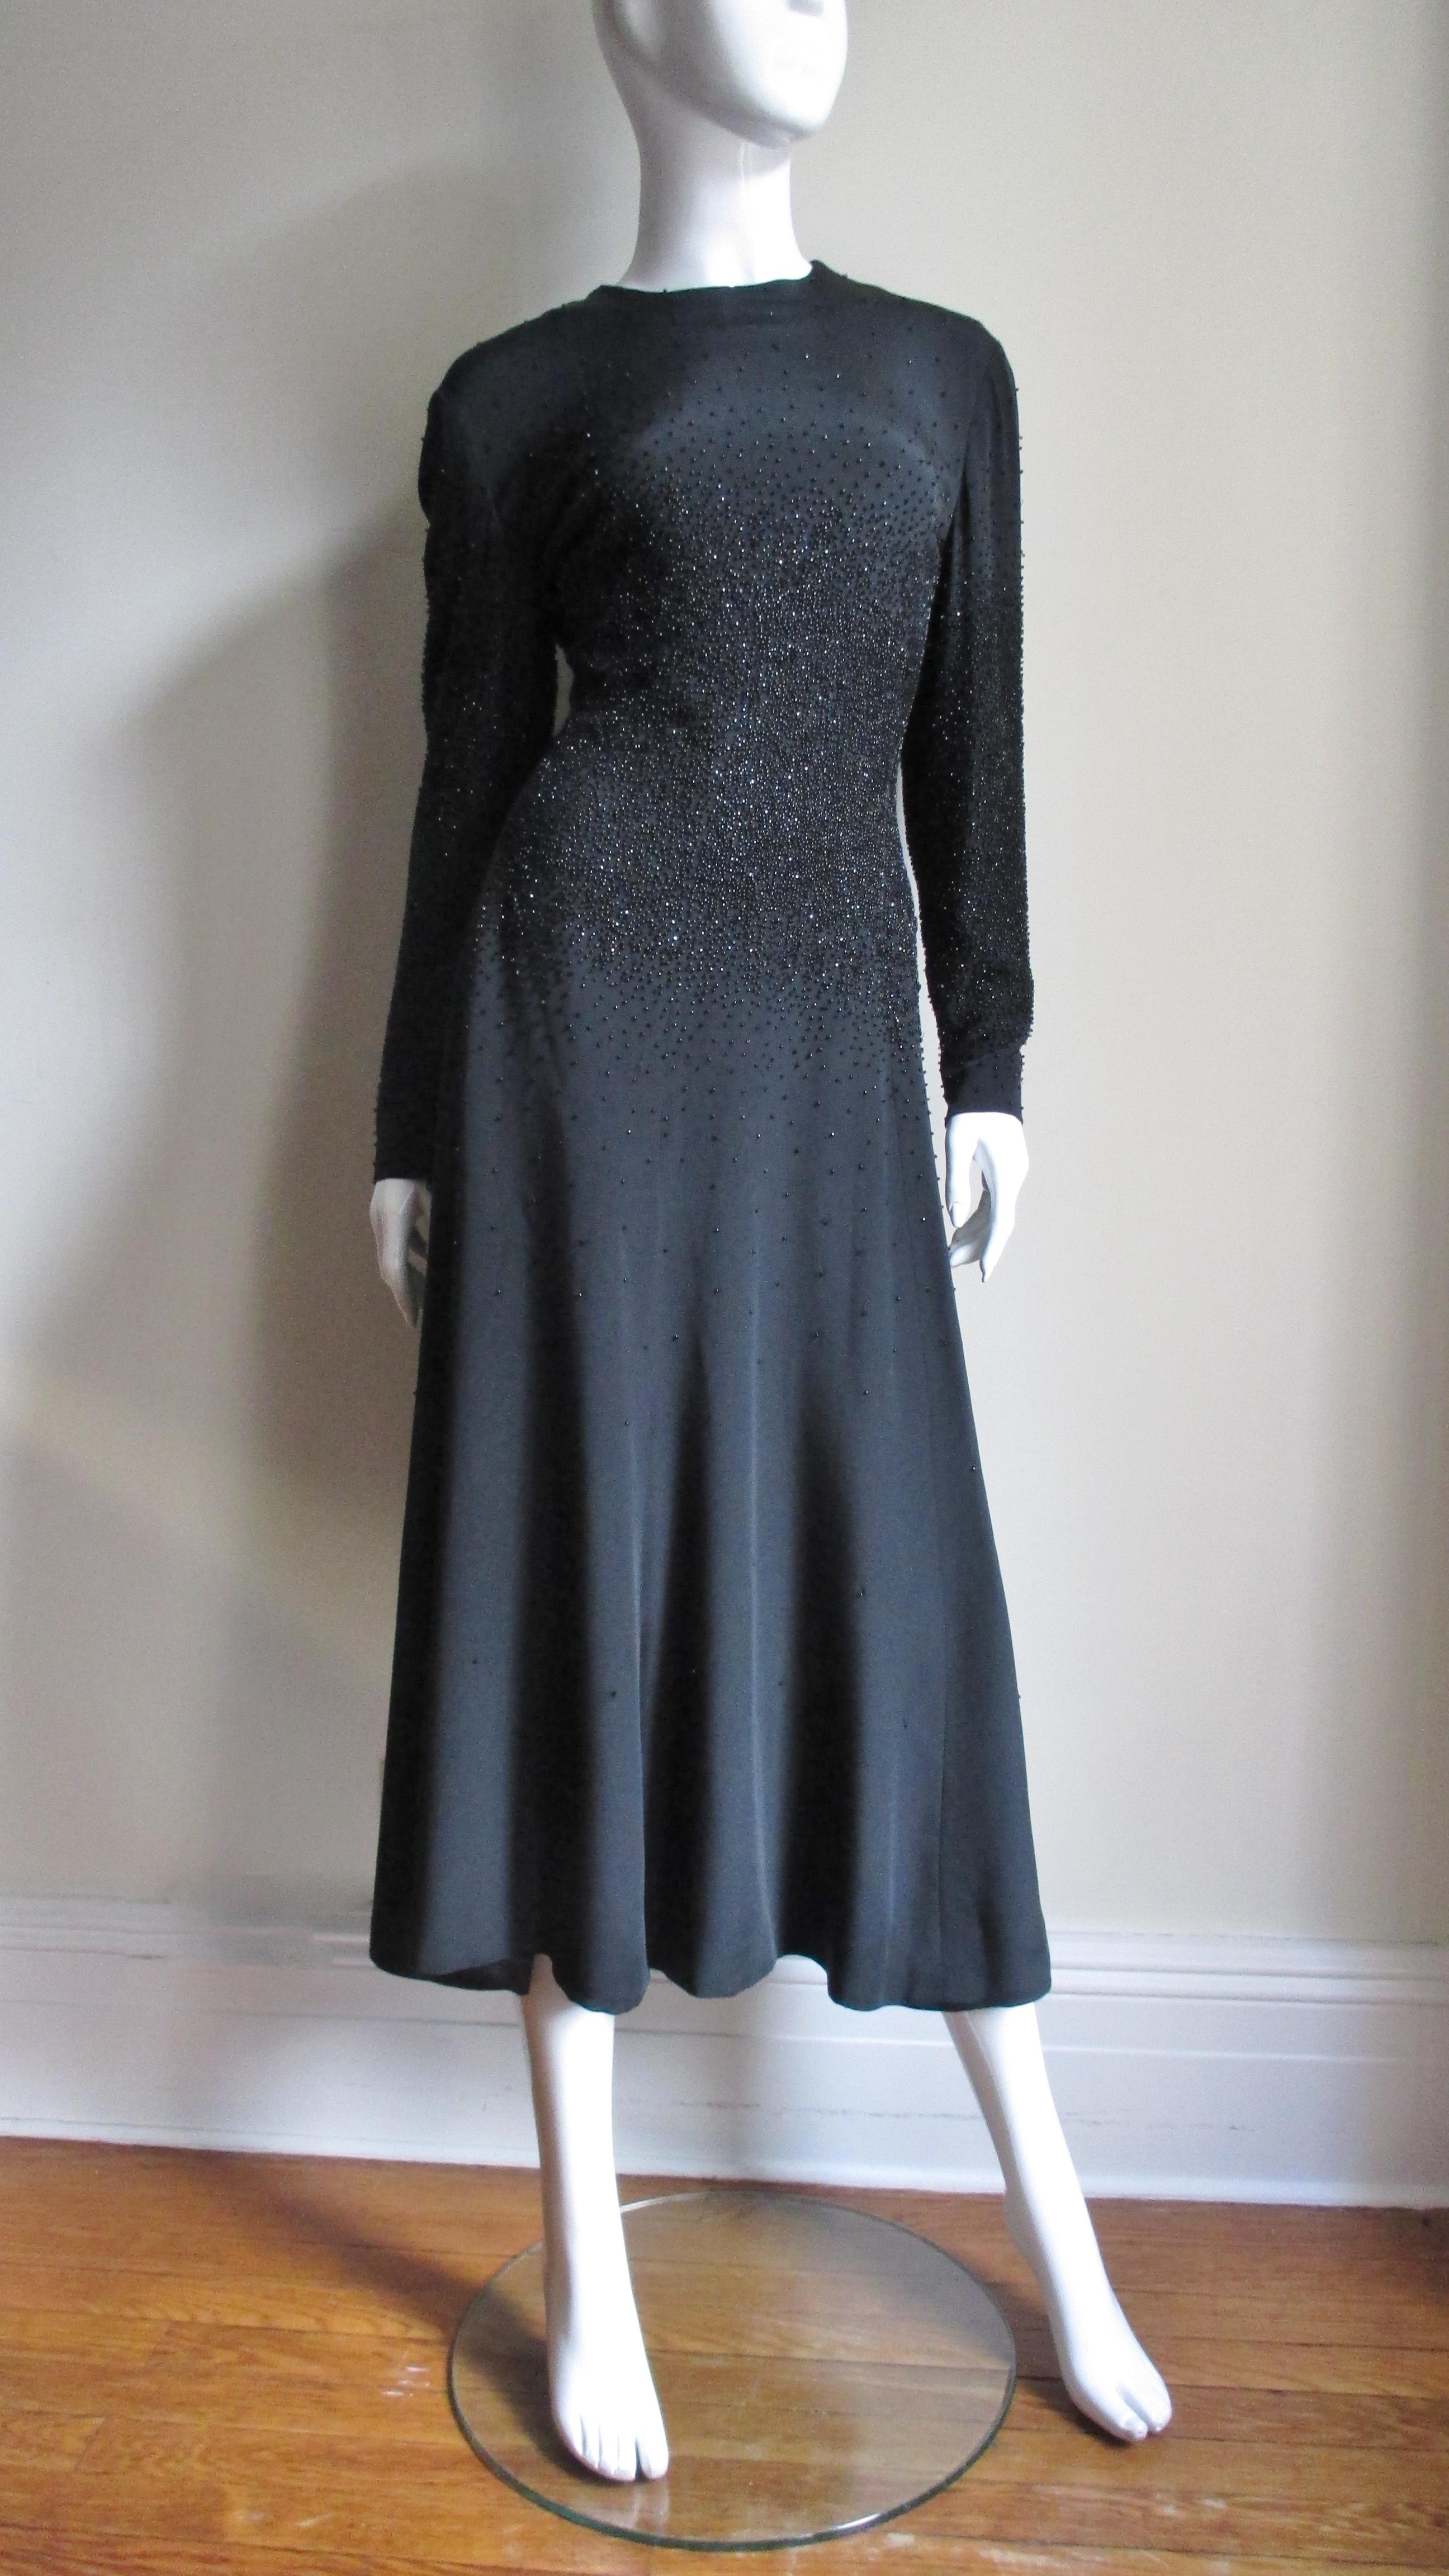 A fabulous black midi length silk dress from Donald Brooks.  It has a crew neckline, long sleeves with zippers at the wrists and is semi fitted through the bodice then flares into a full skirt.  What sets it apart aside from it's elegant simplicity